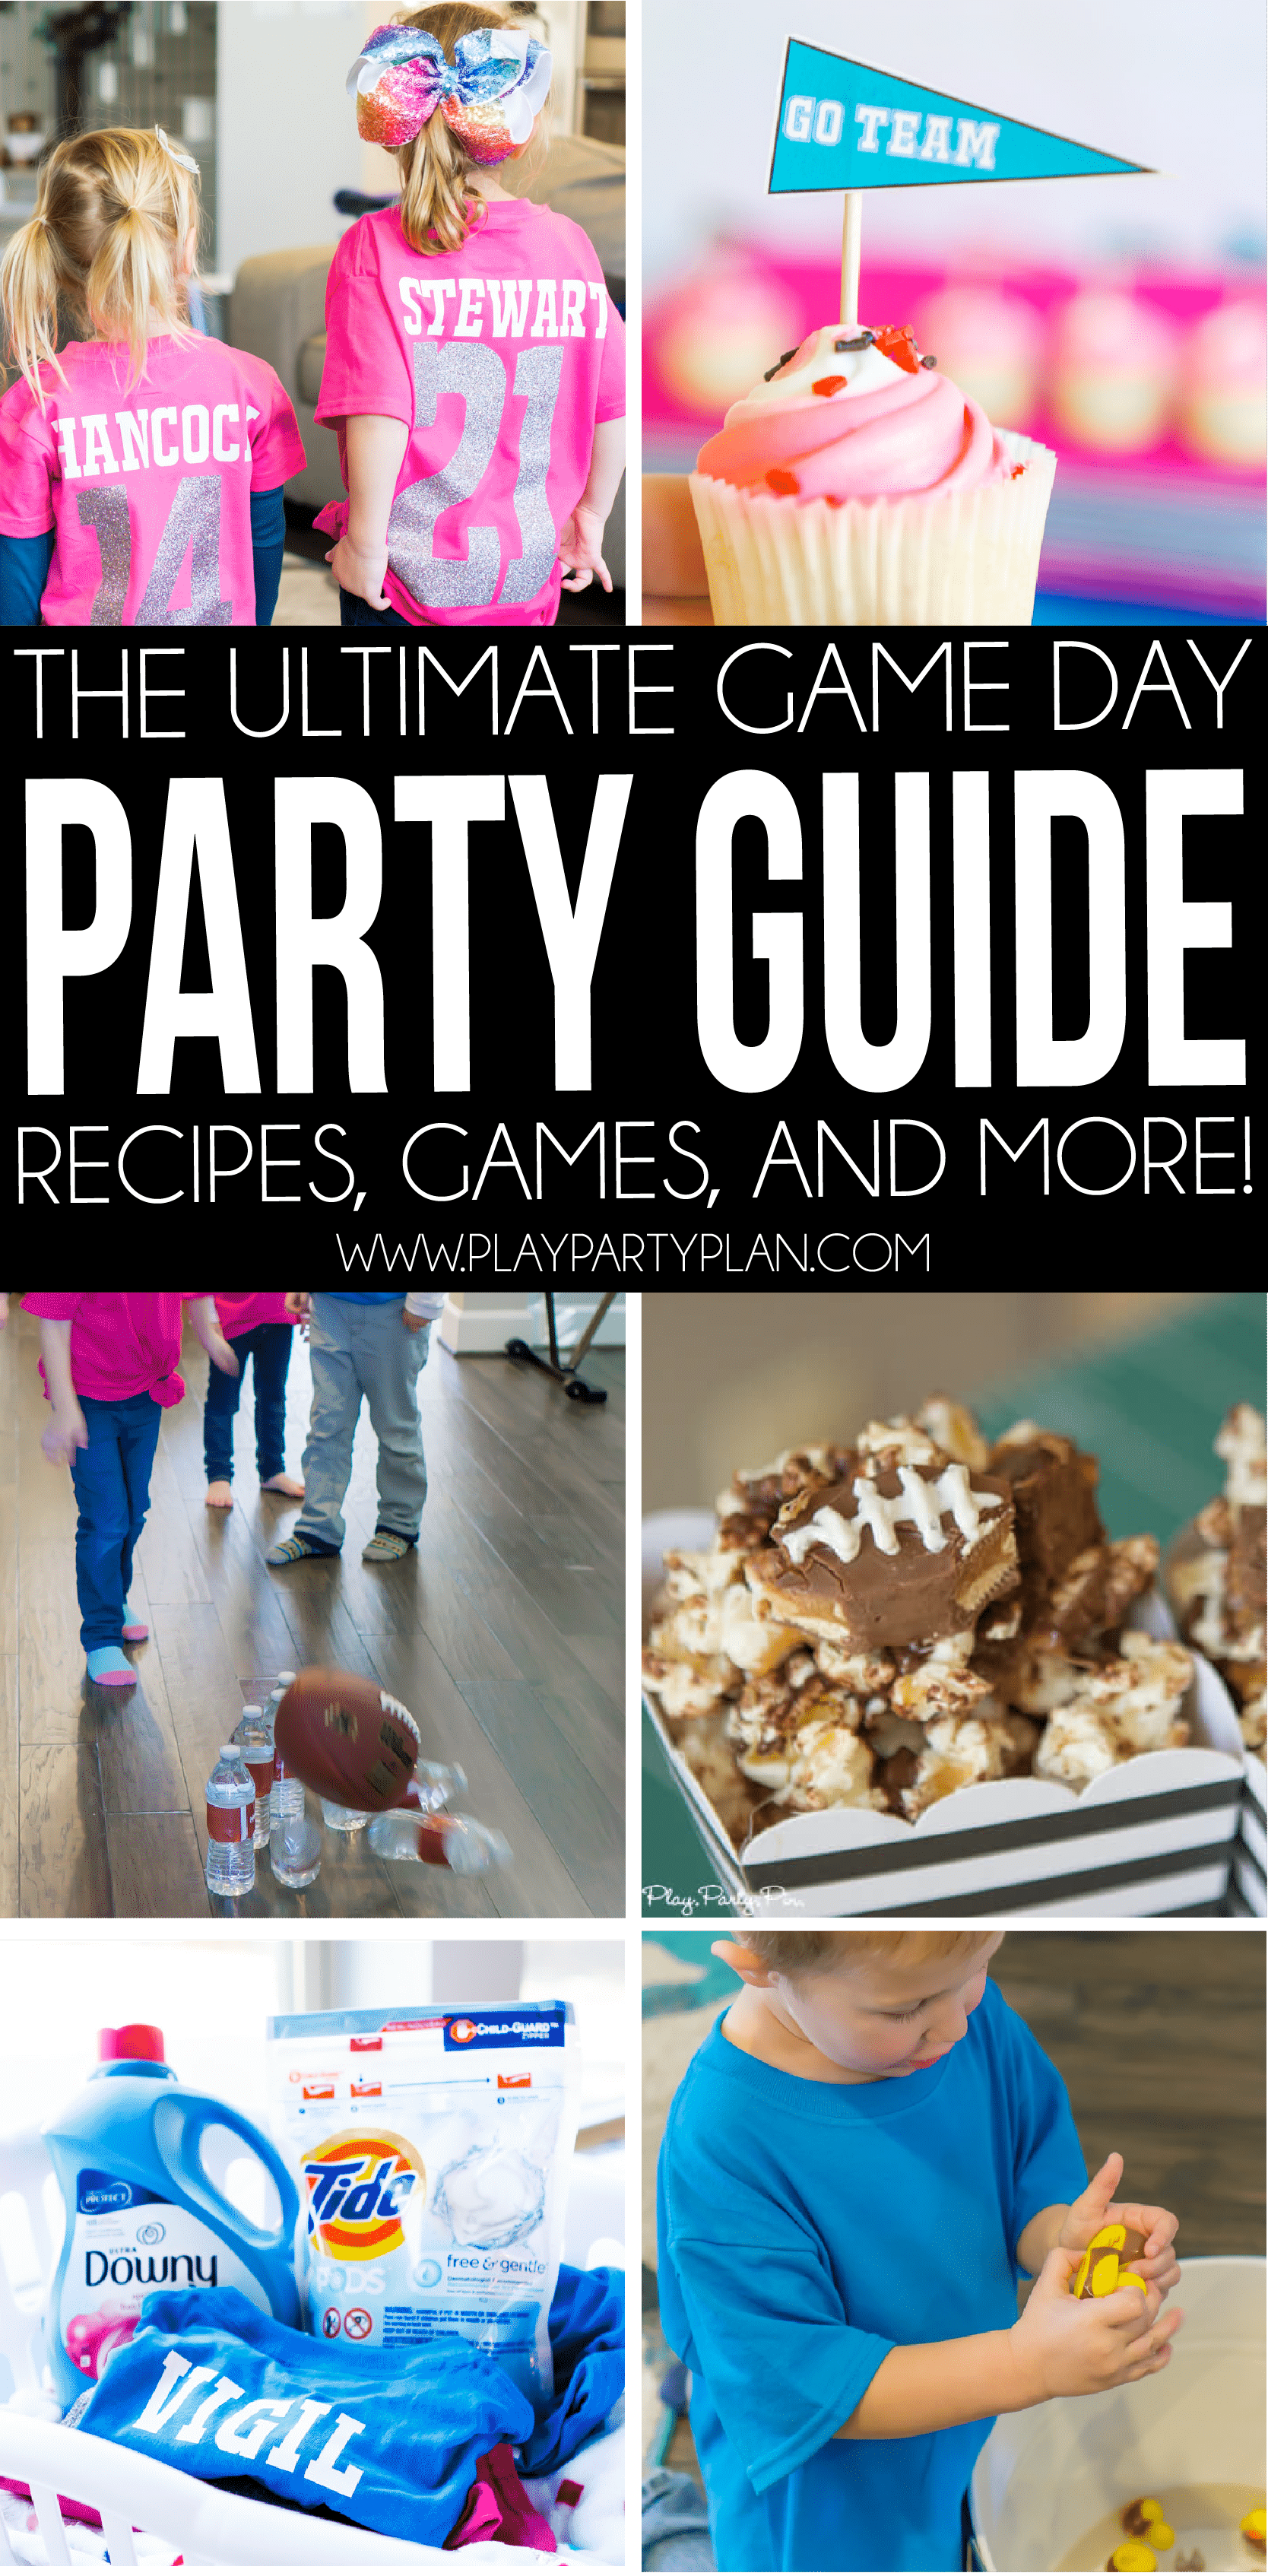 https://www.playpartyplan.com/wp-content/uploads/2018/01/GAME-DAY-PARTY-GUIDE-01.png